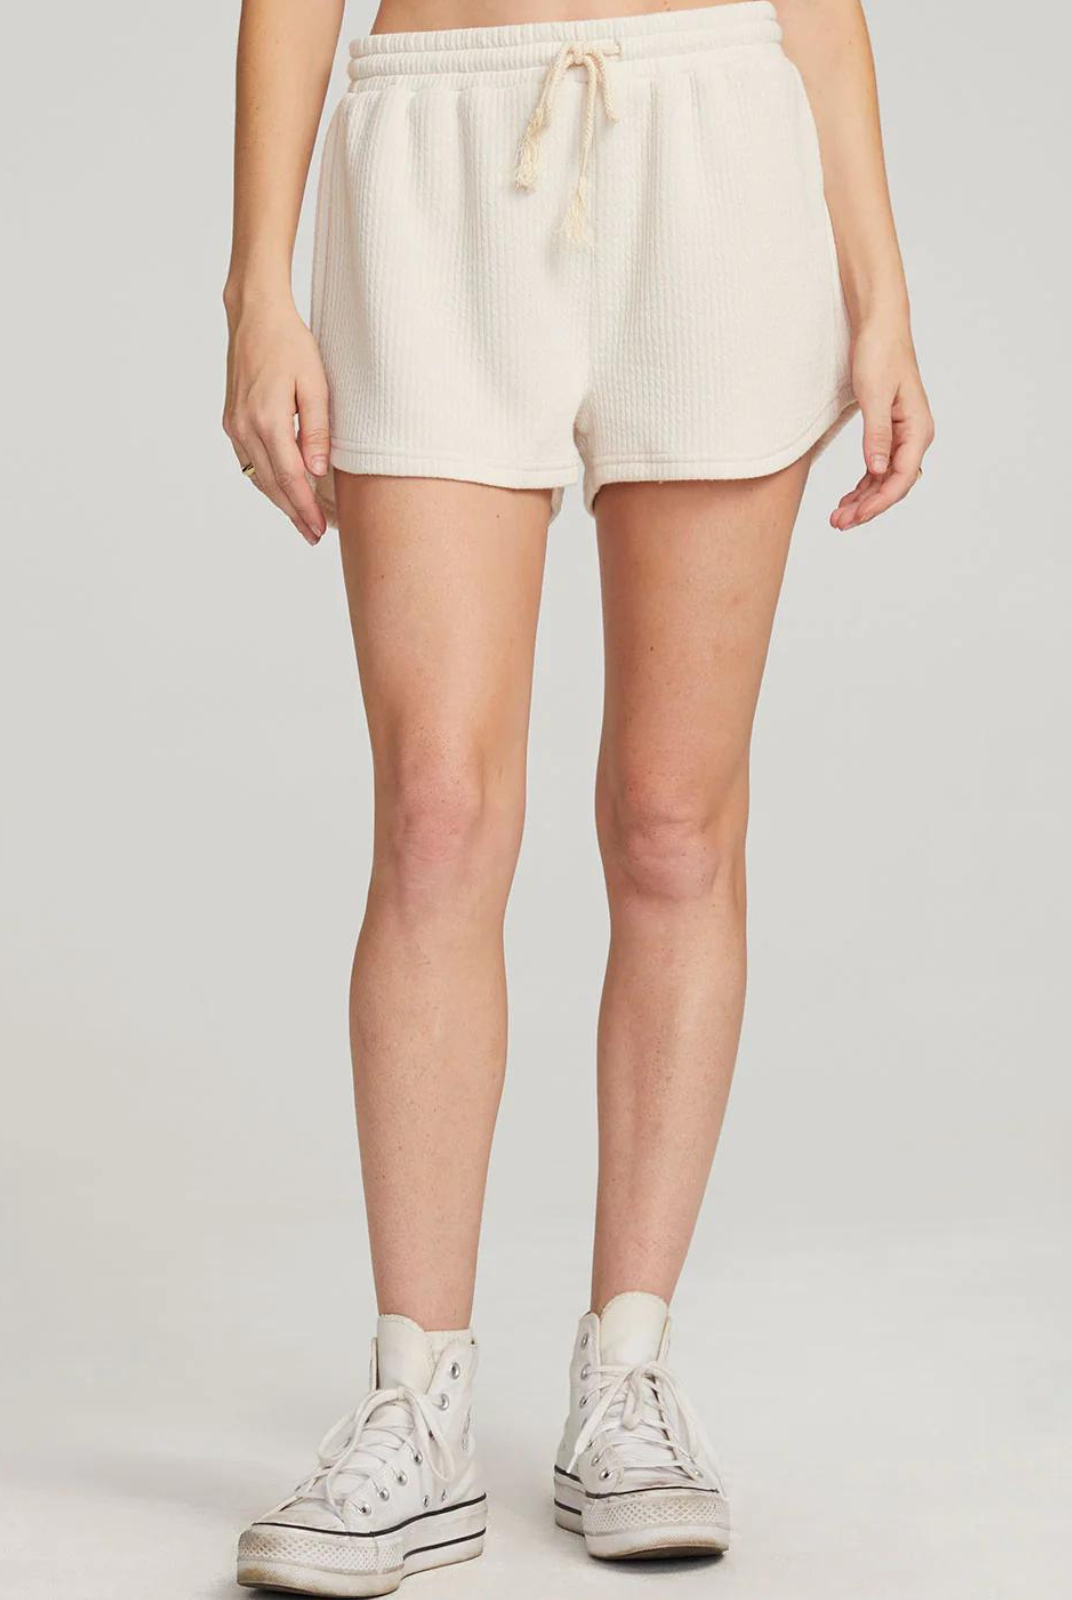 Saltwater Luxe Pull On Short - Salt. Short and sweet! Our Pull On Short in a white salt color is a versatile piece that gives a sporty stylish look.